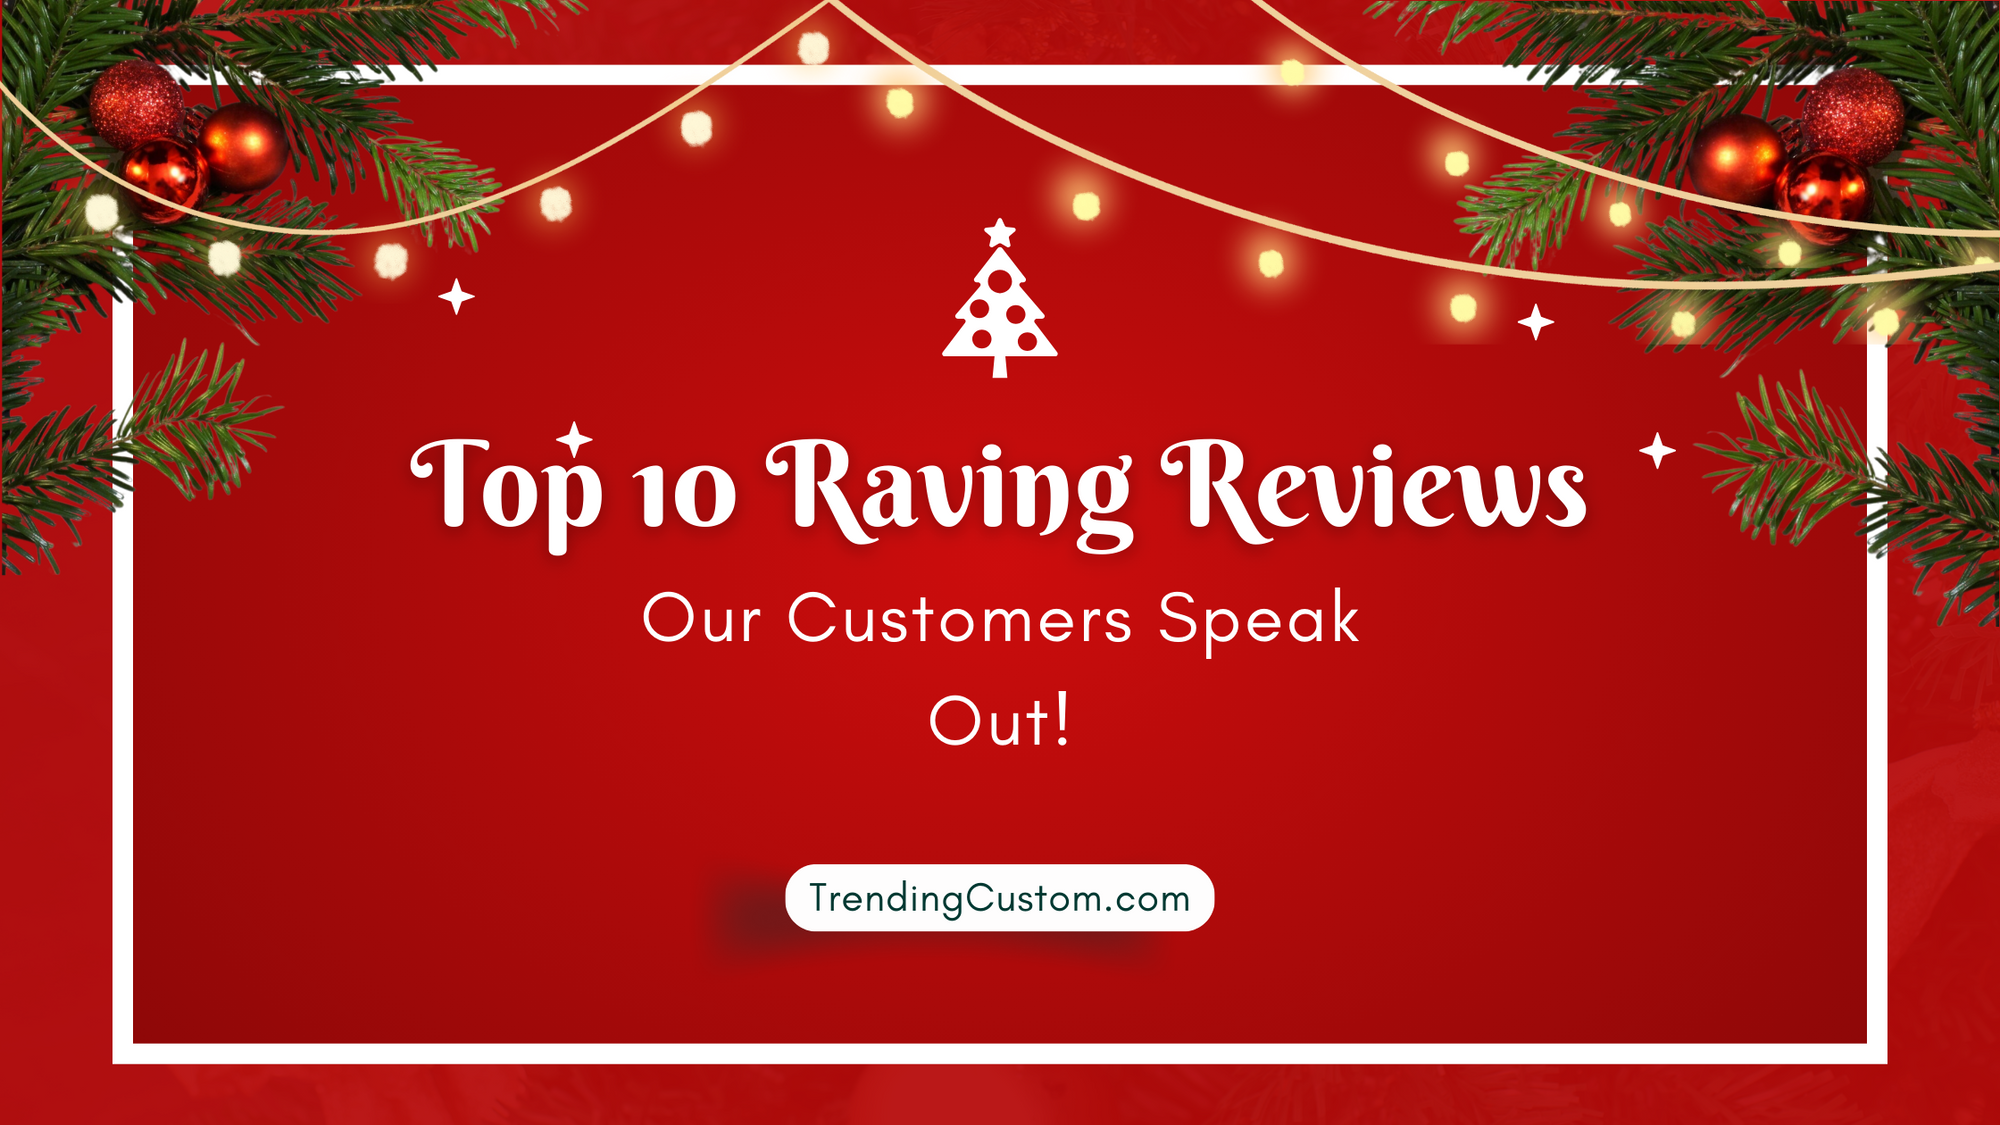 Top 10 Raving Reviews: Our Customers Speak Out! - November 19th